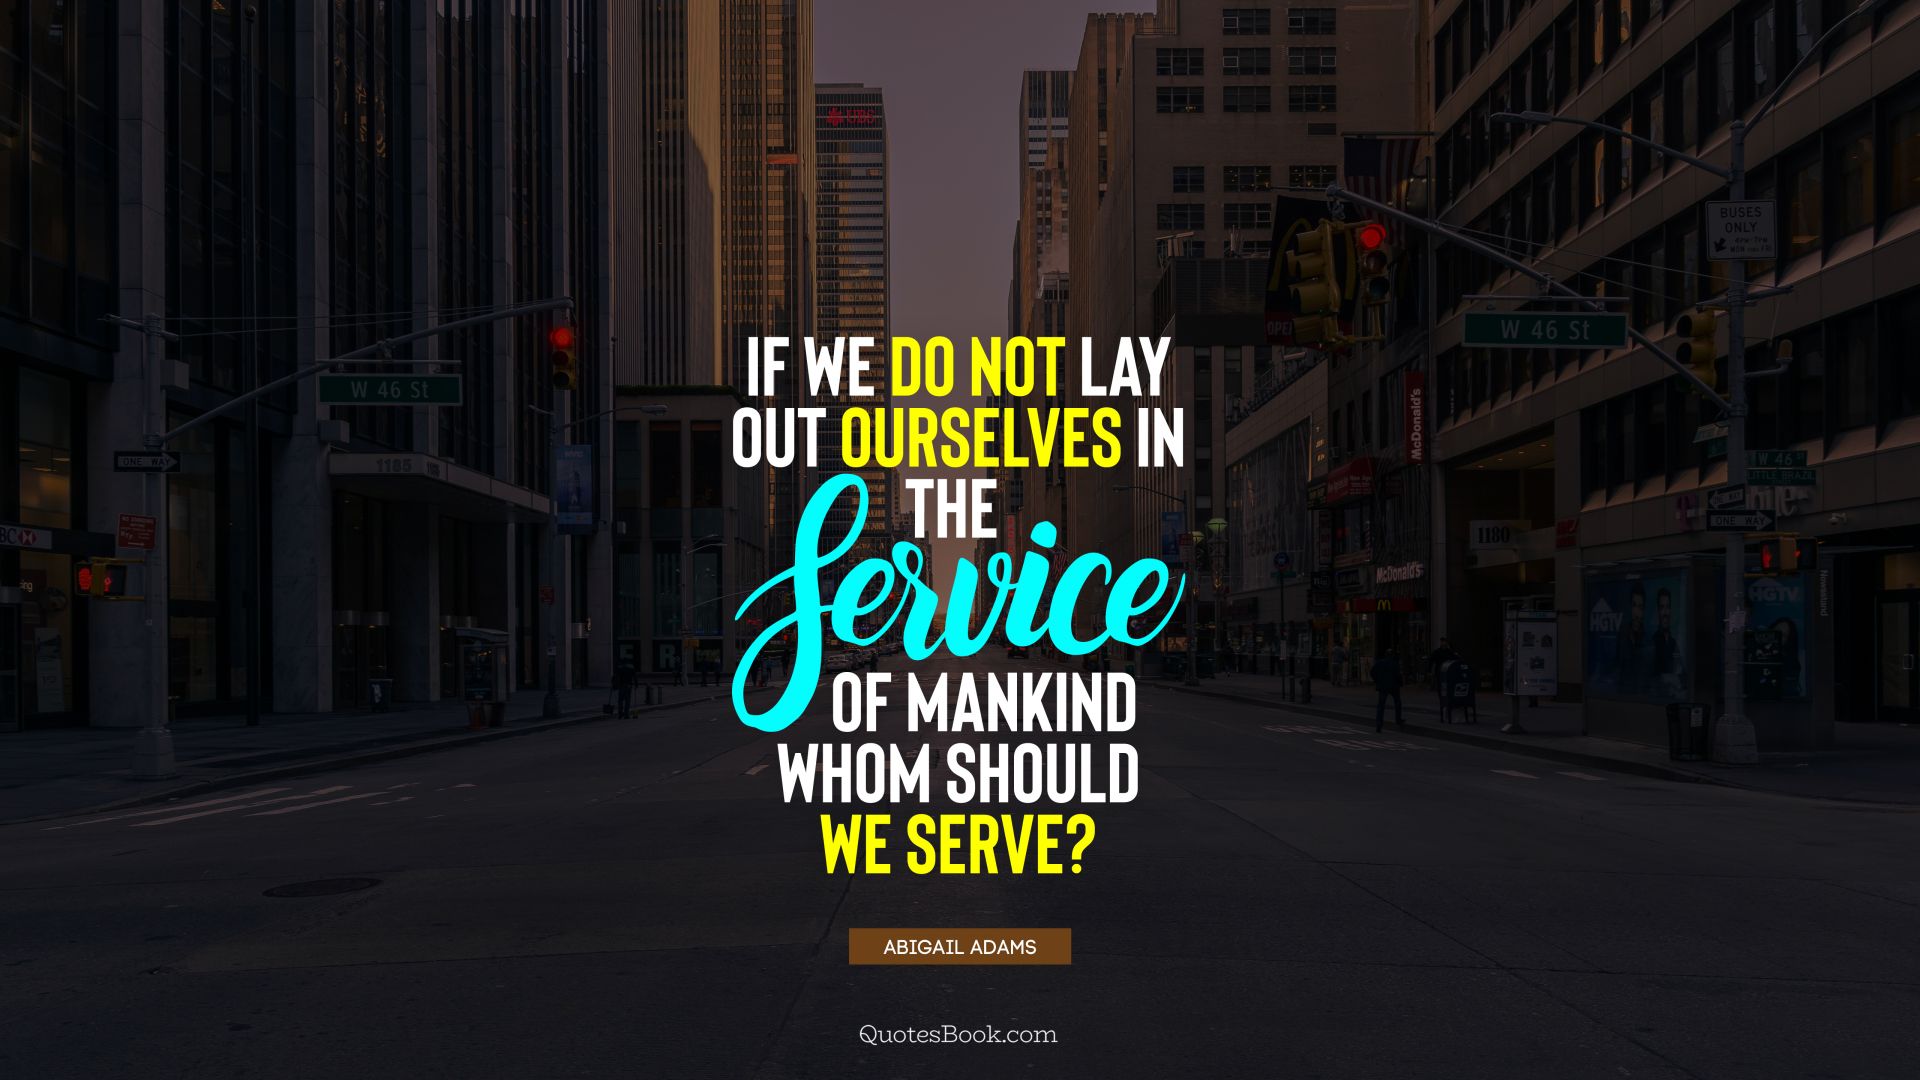 If we do not lay out ourselves in the service of mankind whom should we serve?. - Quote by Abigail Adams